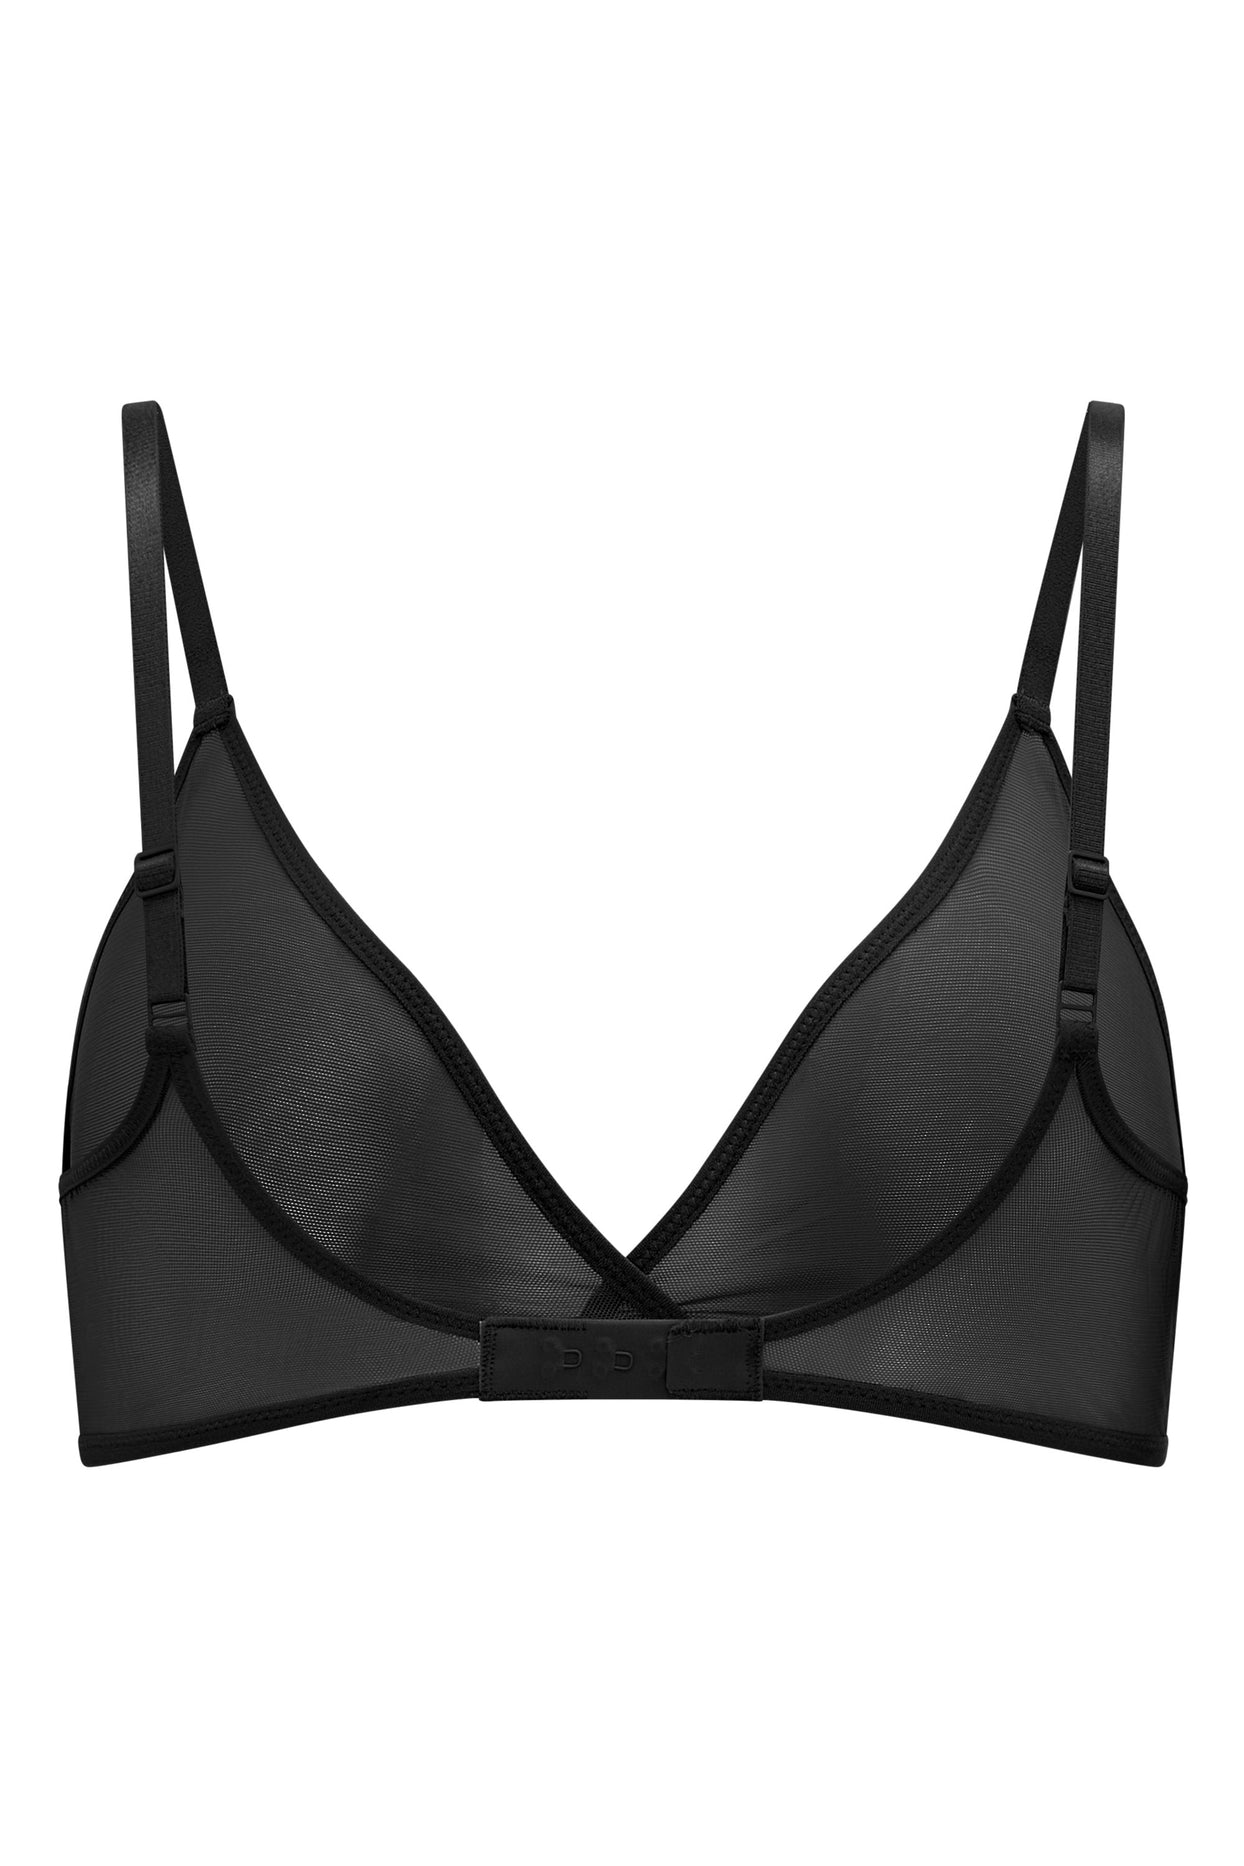 Intimates Soft Mesh Single Layer Triangle Bra in Black | Oh Polly